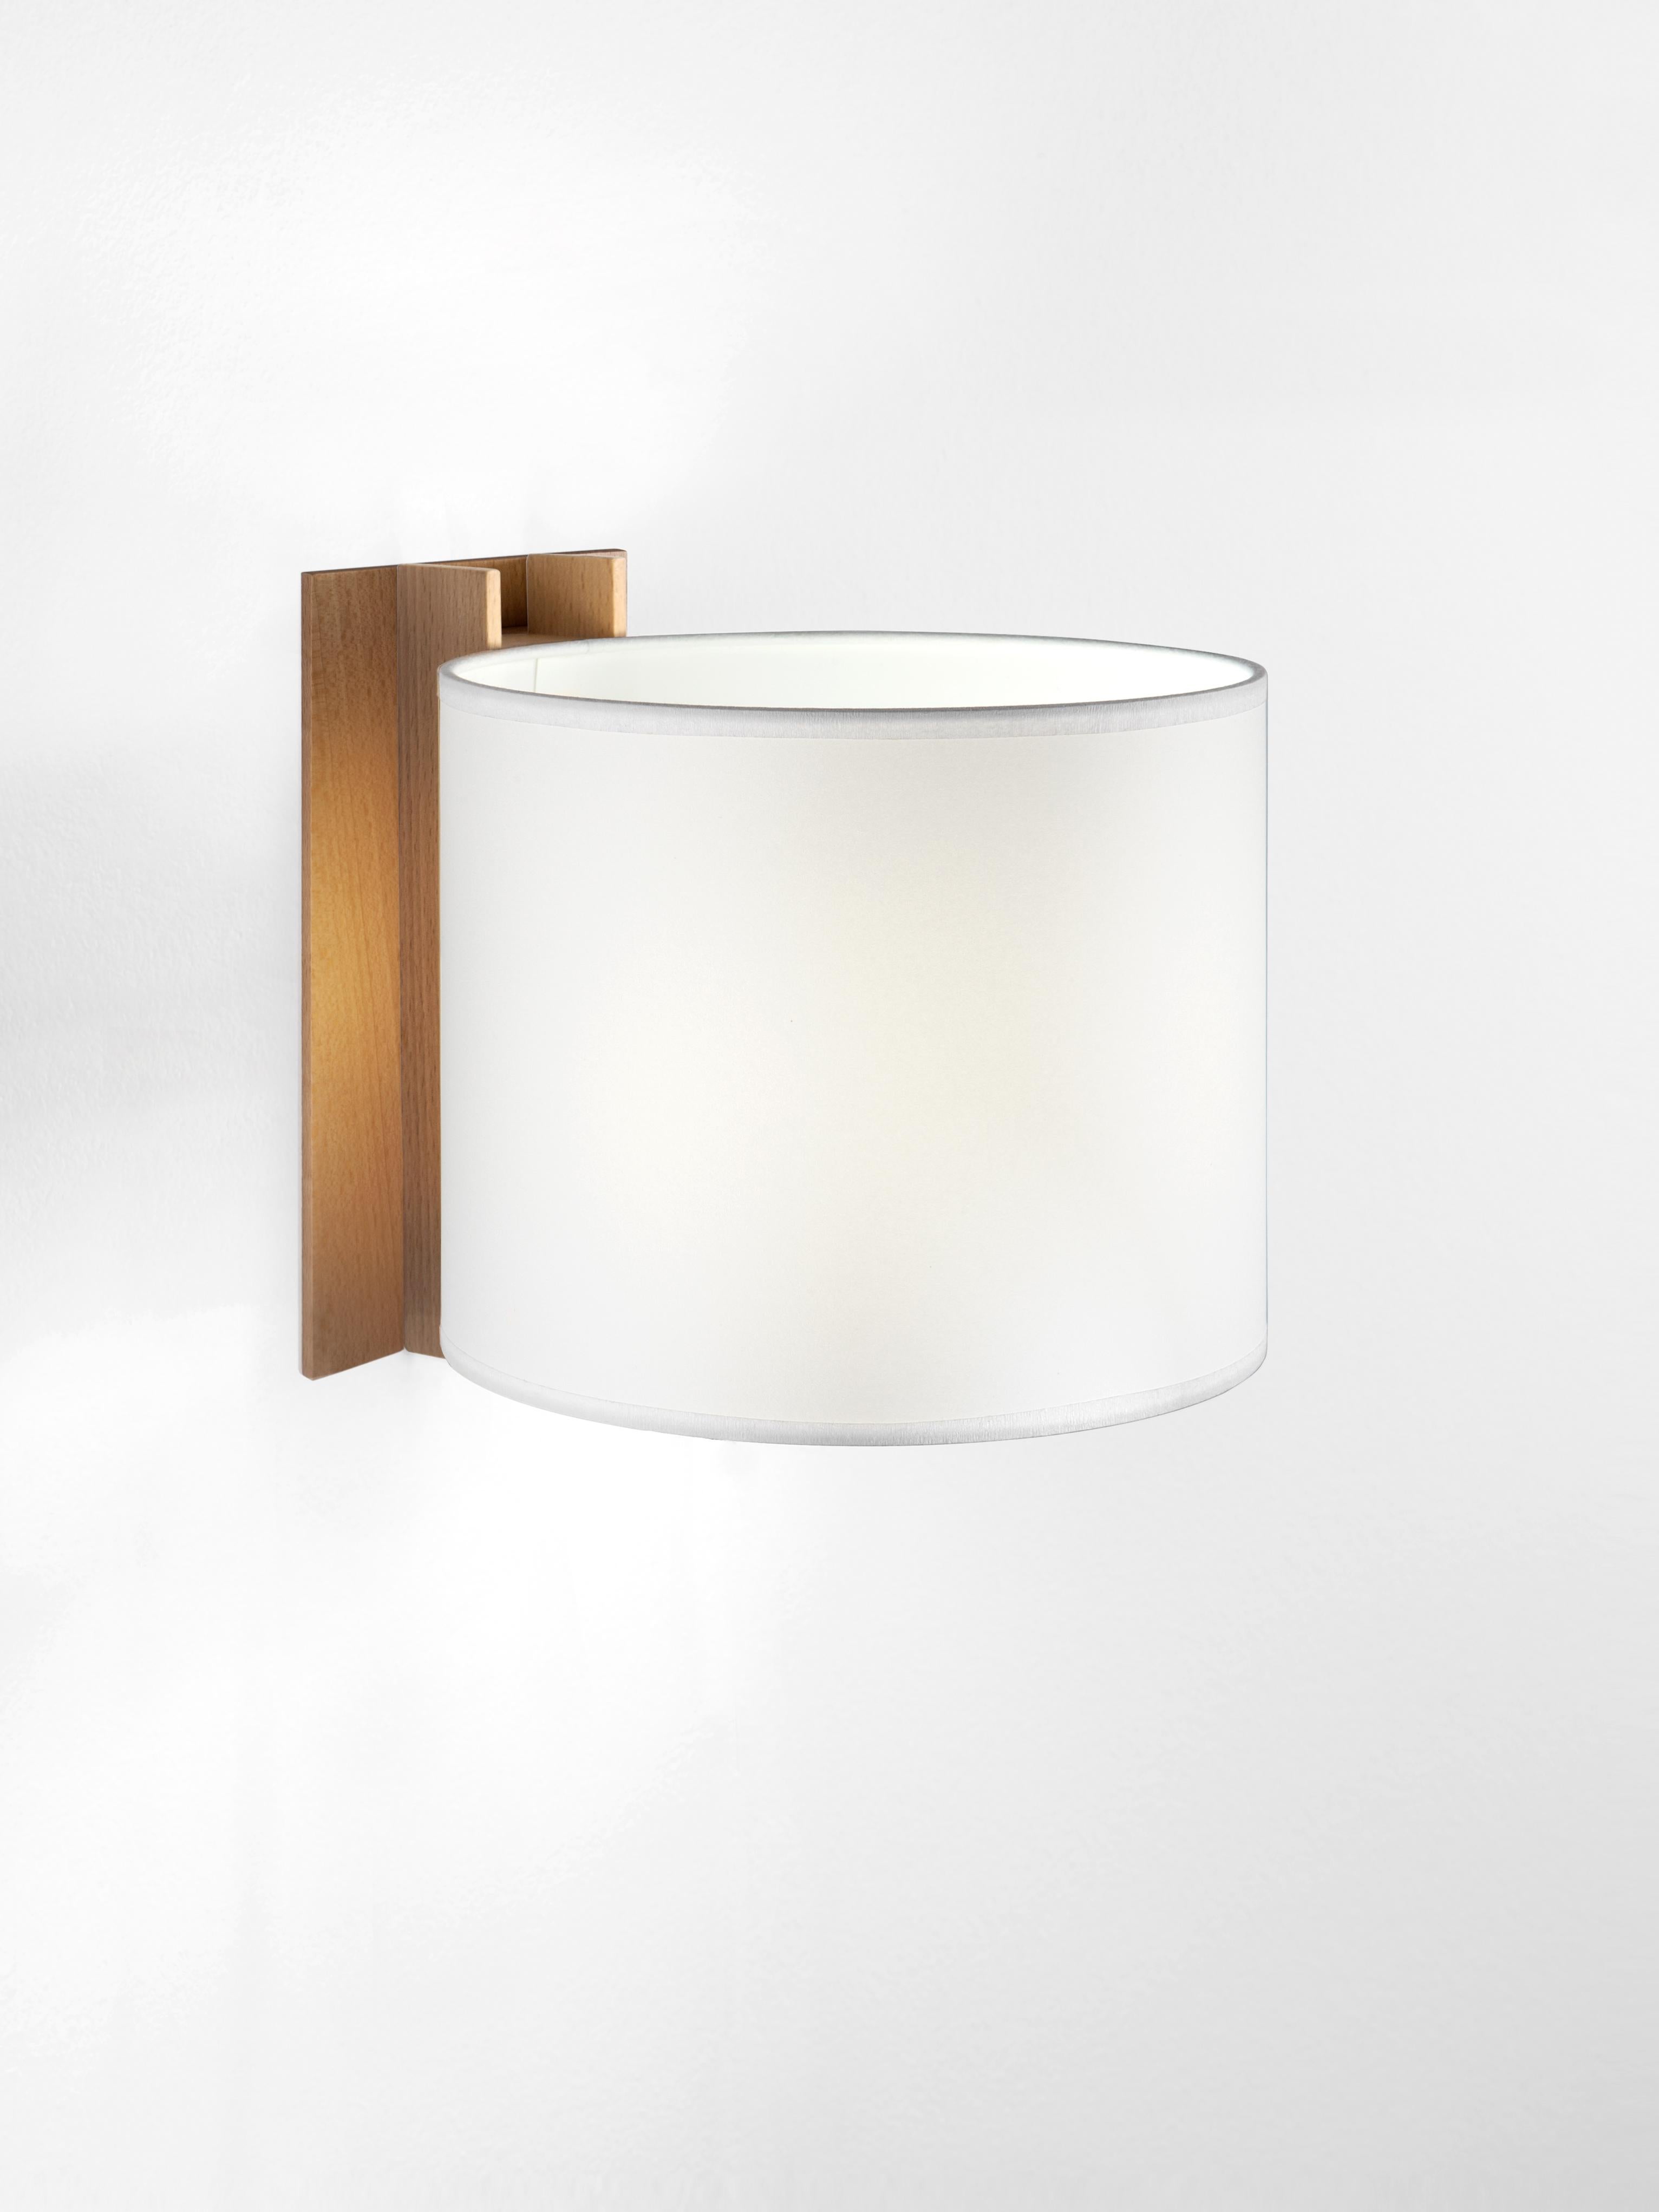 White and Beech TMM Corto wall lamp by Miguel Milá
Dimensions: D 20 x W 23 x H 20 cm
Materials: Metal, beech wood, parchment lampshade.
Direct wall.
Available in beech or walnut and in white or beige lampshade.
Available with plug or direct